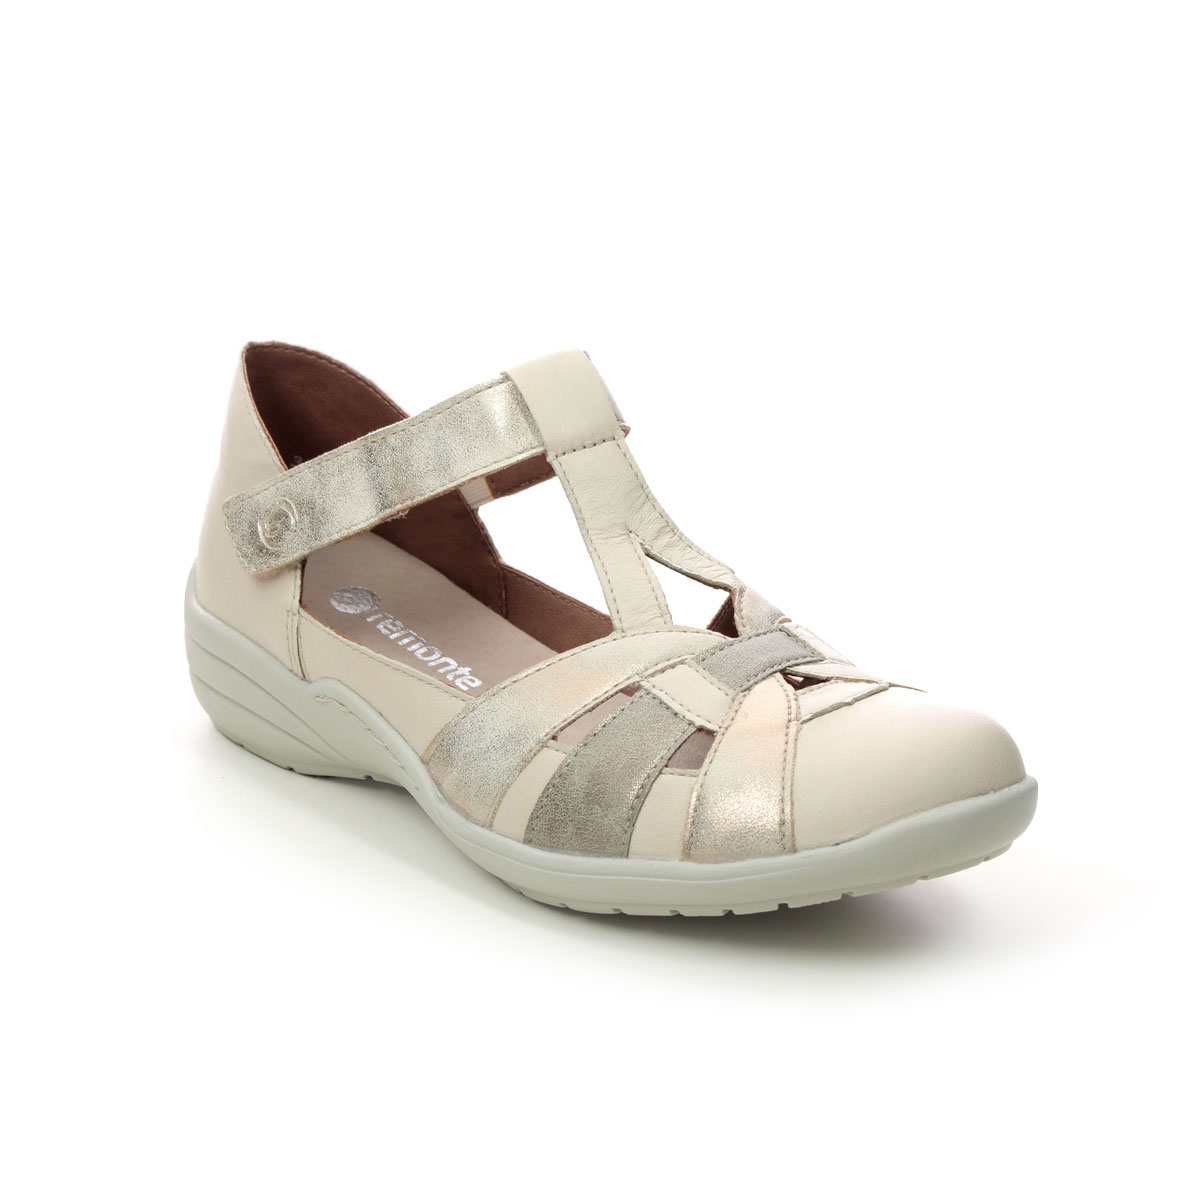 Remonte Bertavall Beige Leather Womens Closed Toe Sandals R7601-80 In Size 41 In Plain Beige Leather